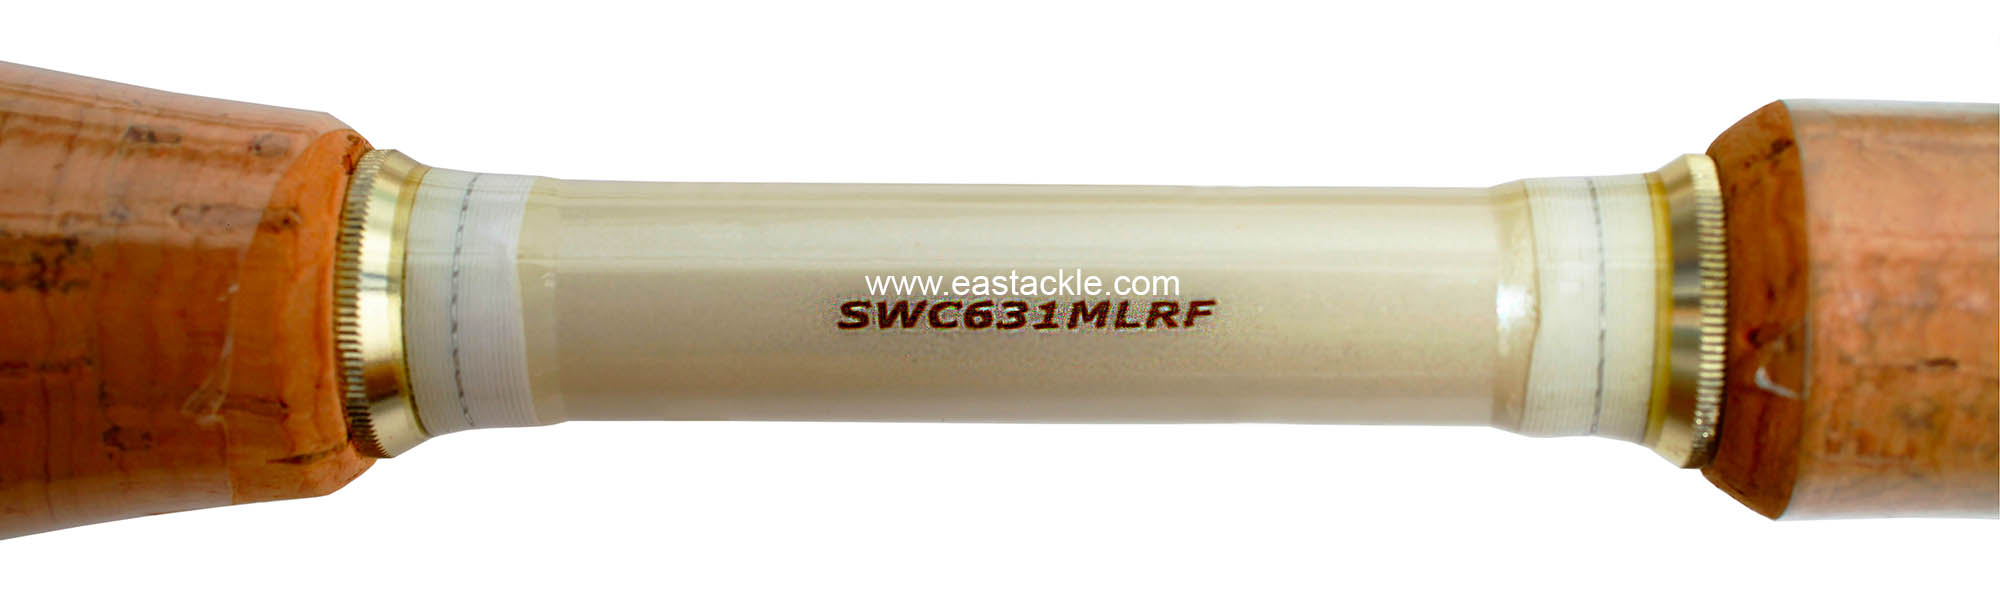 Rapala - Snow - SWC631MLRF - Bait Casting Rod - Blank Specifications (Under View) | Eastackle